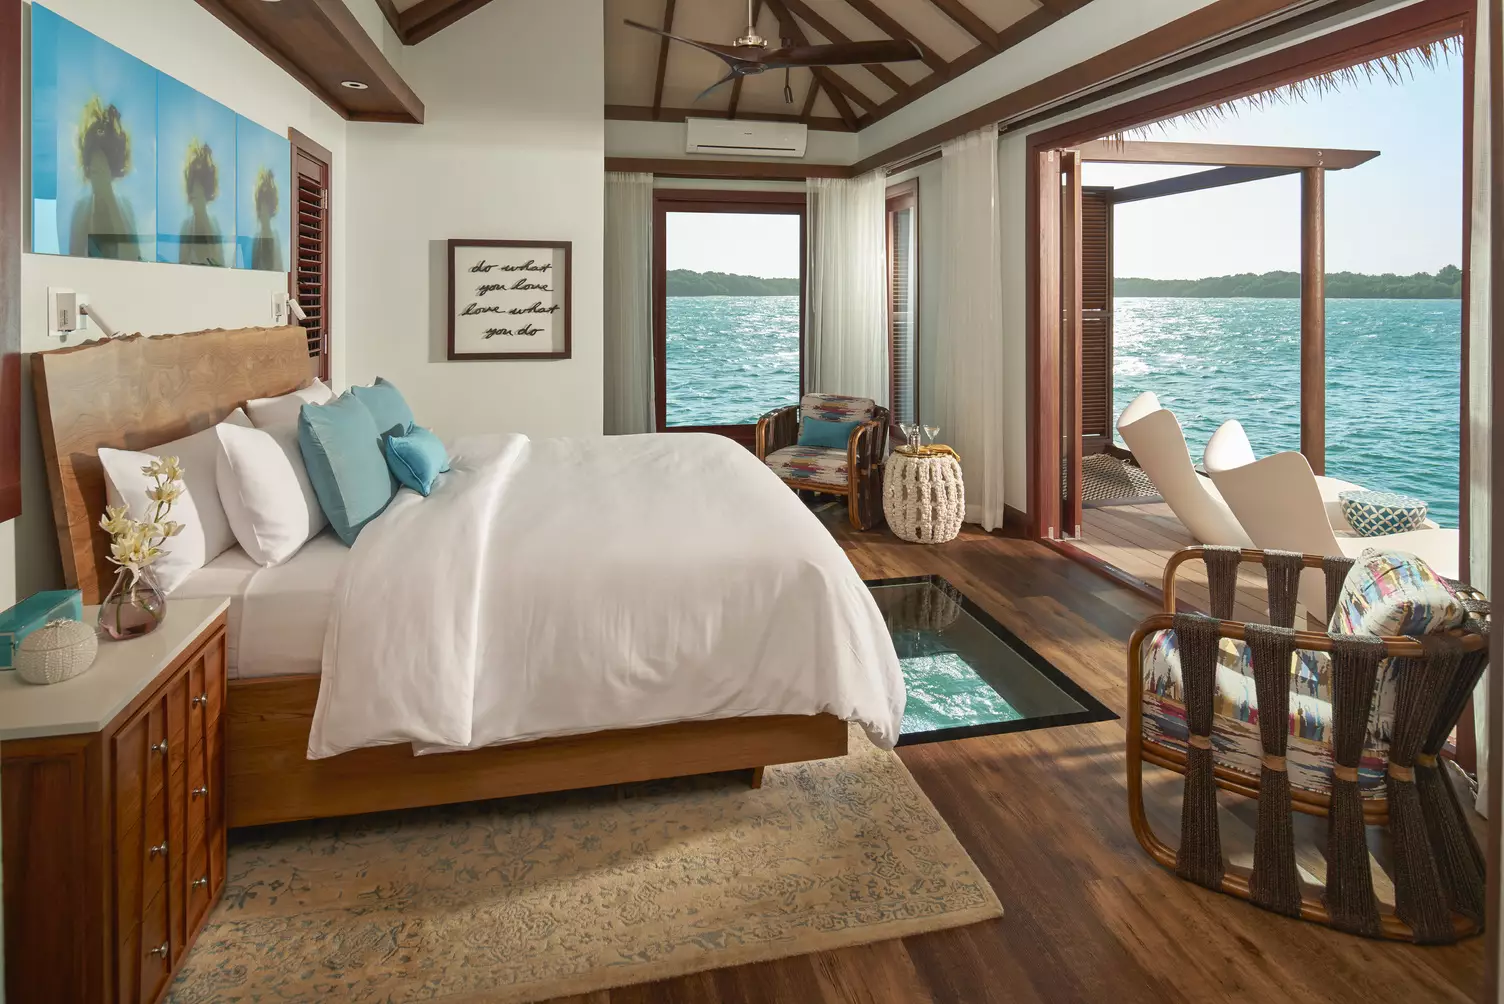 There's a glass panel on the floor of your bedroom where you can spy down on marine life (